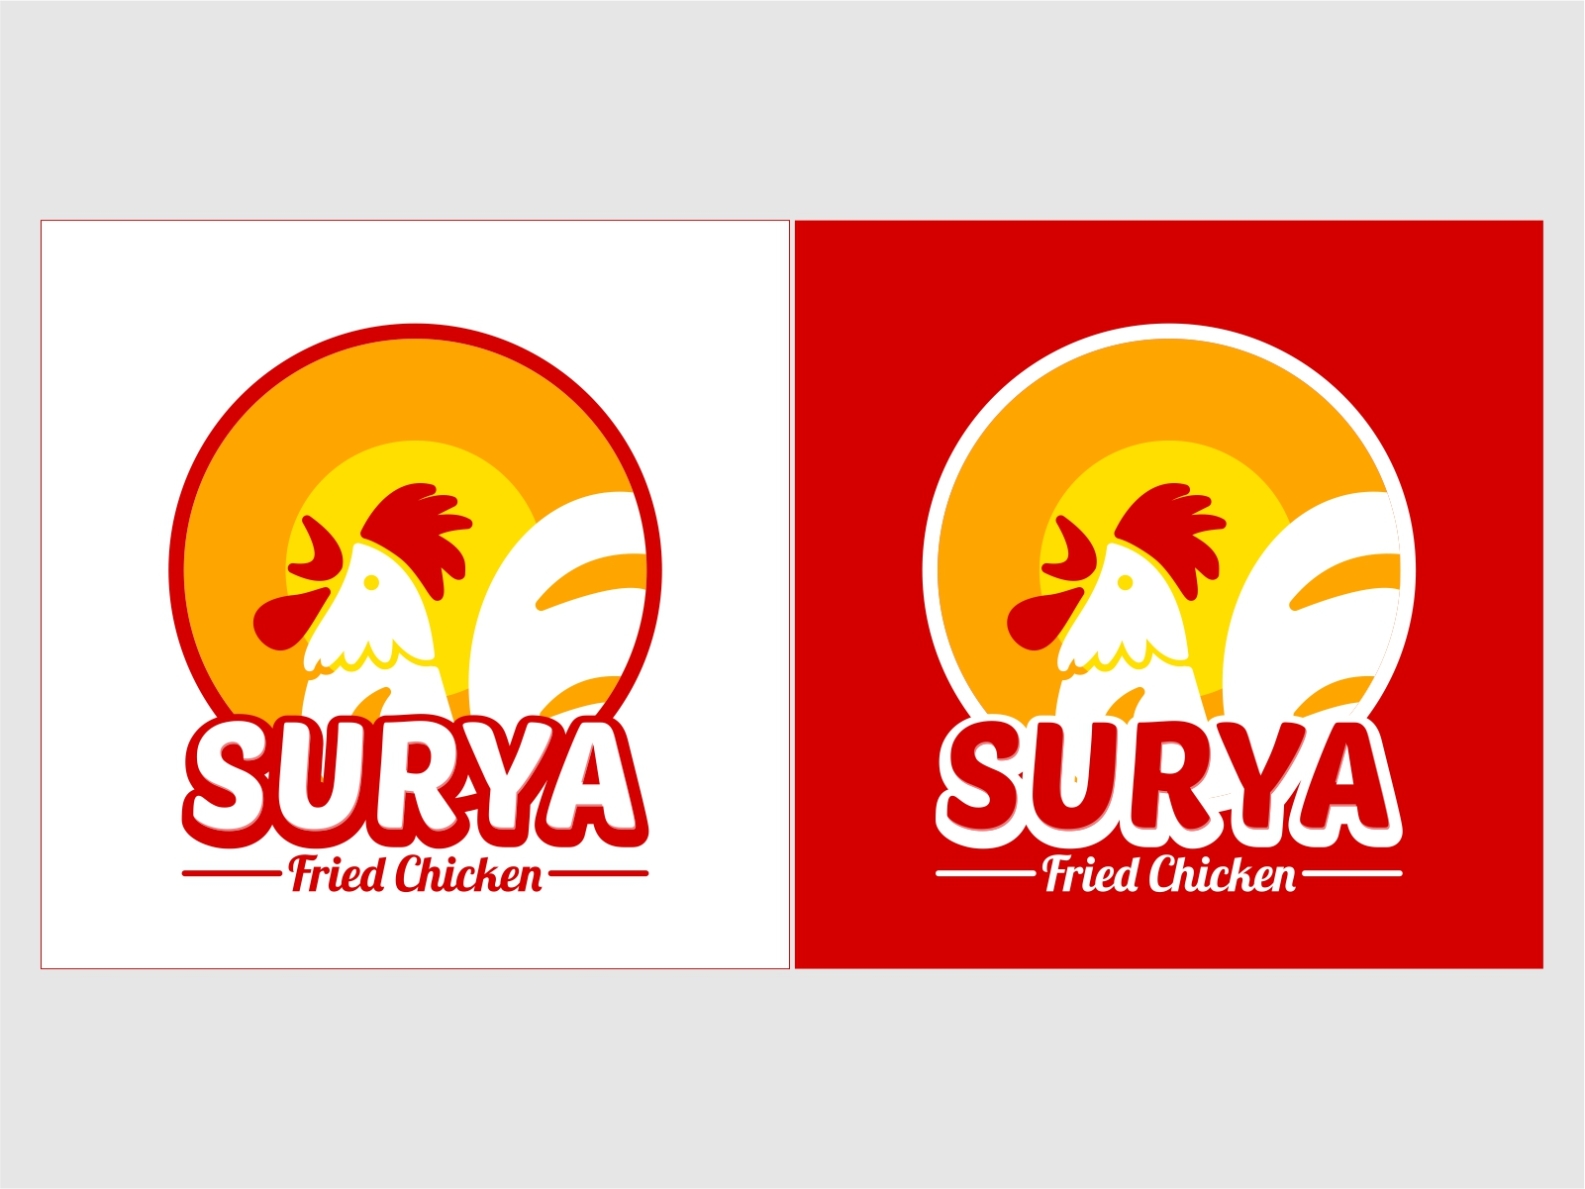 Surya Logo: Over 265 Royalty-Free Licensable Stock Illustrations & Drawings  | Shutterstock